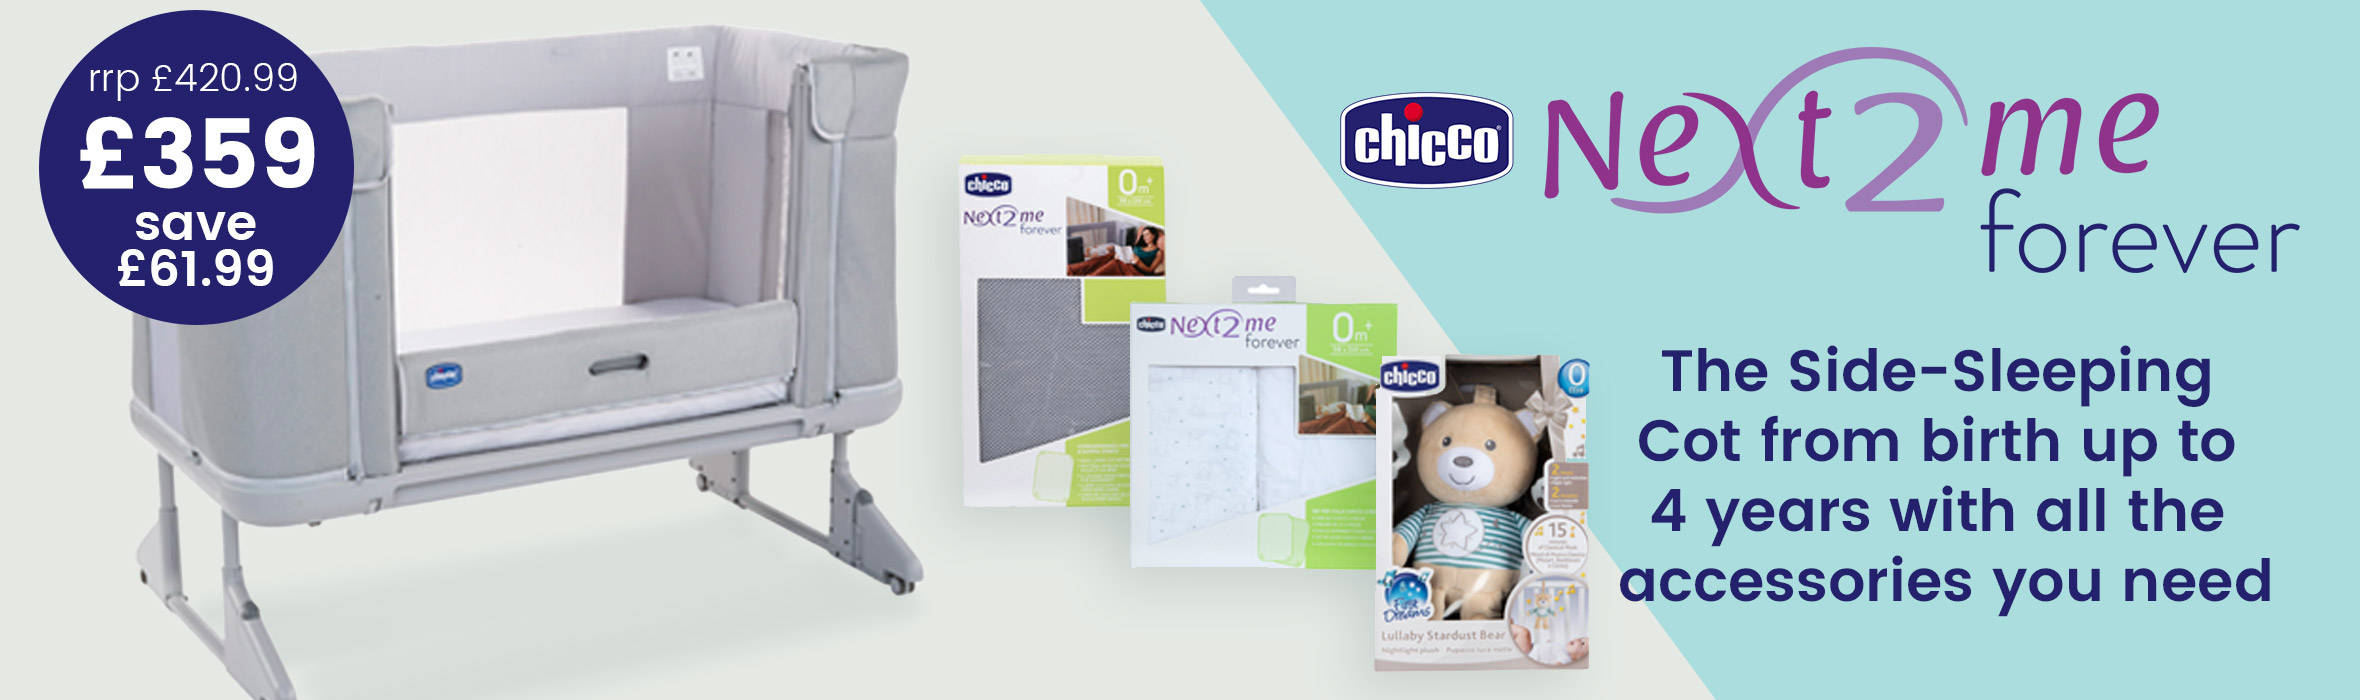 Chicco Next2Me Forever Banner